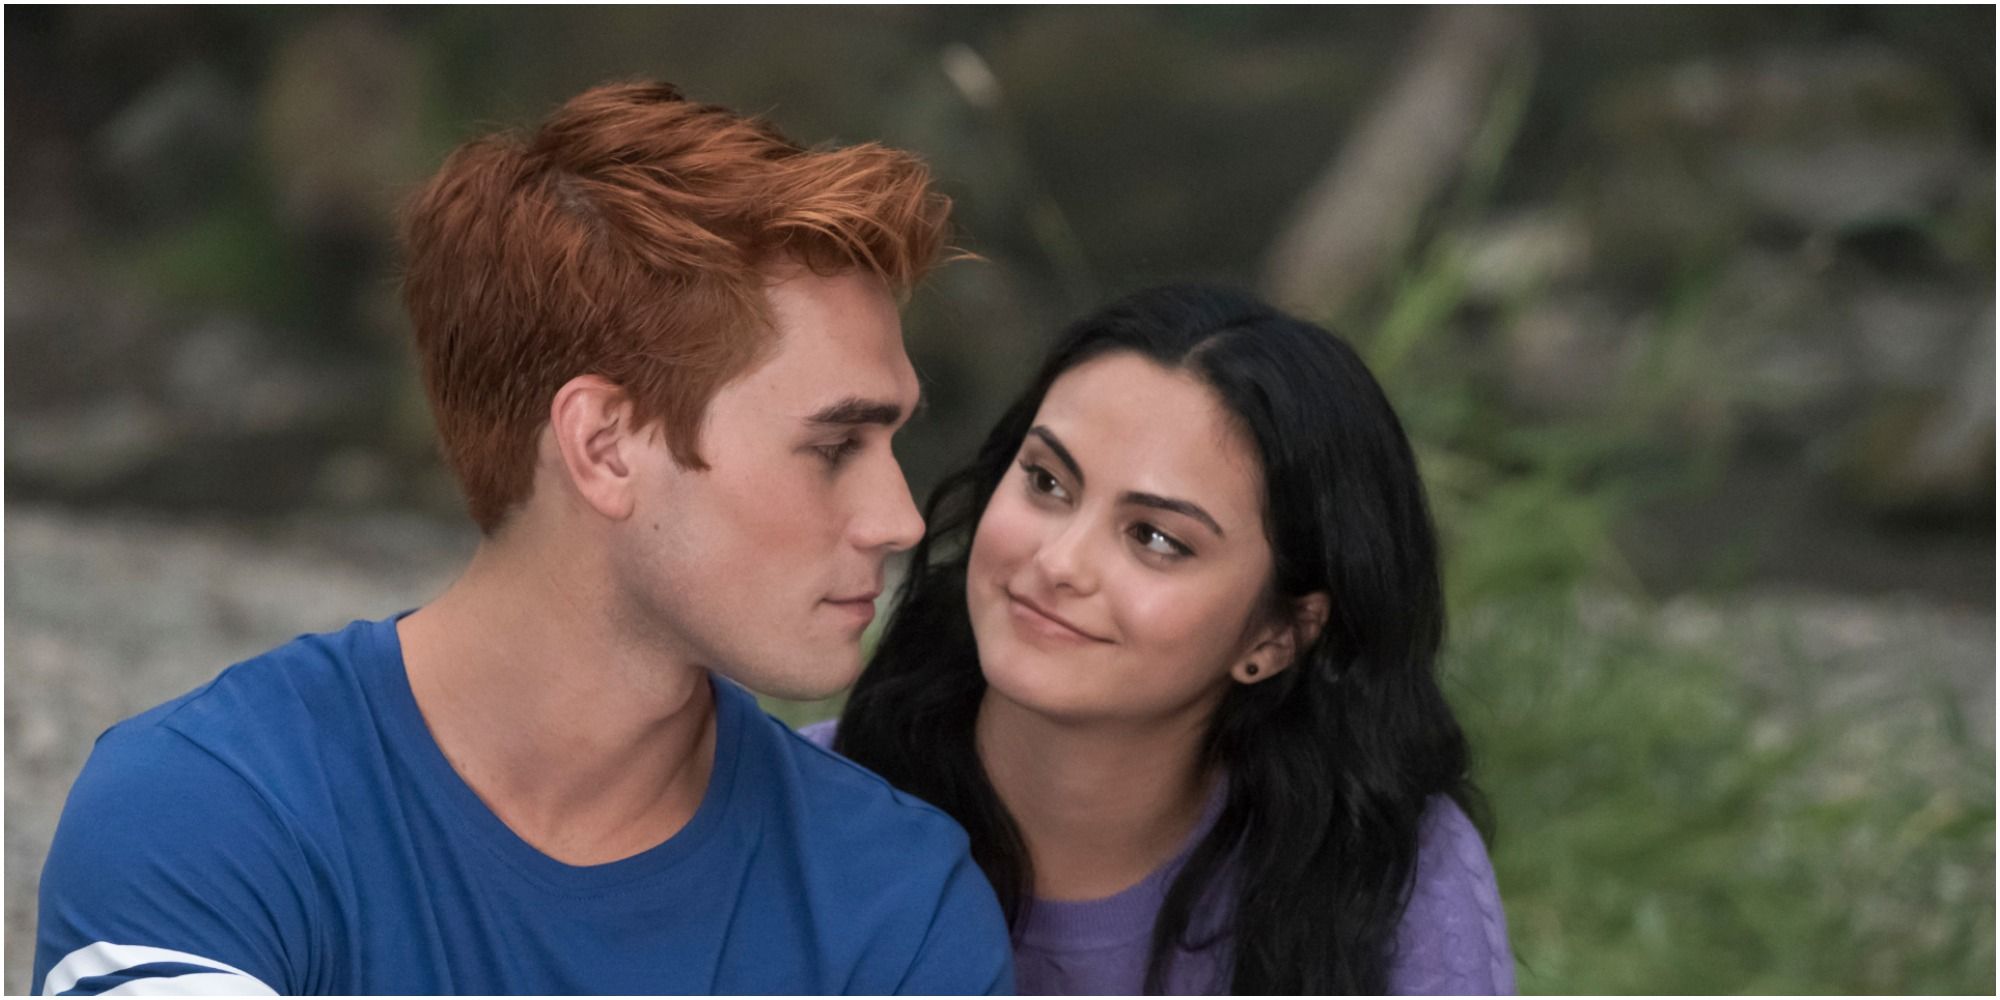 Archie and Veronica sitting together on Riverdale